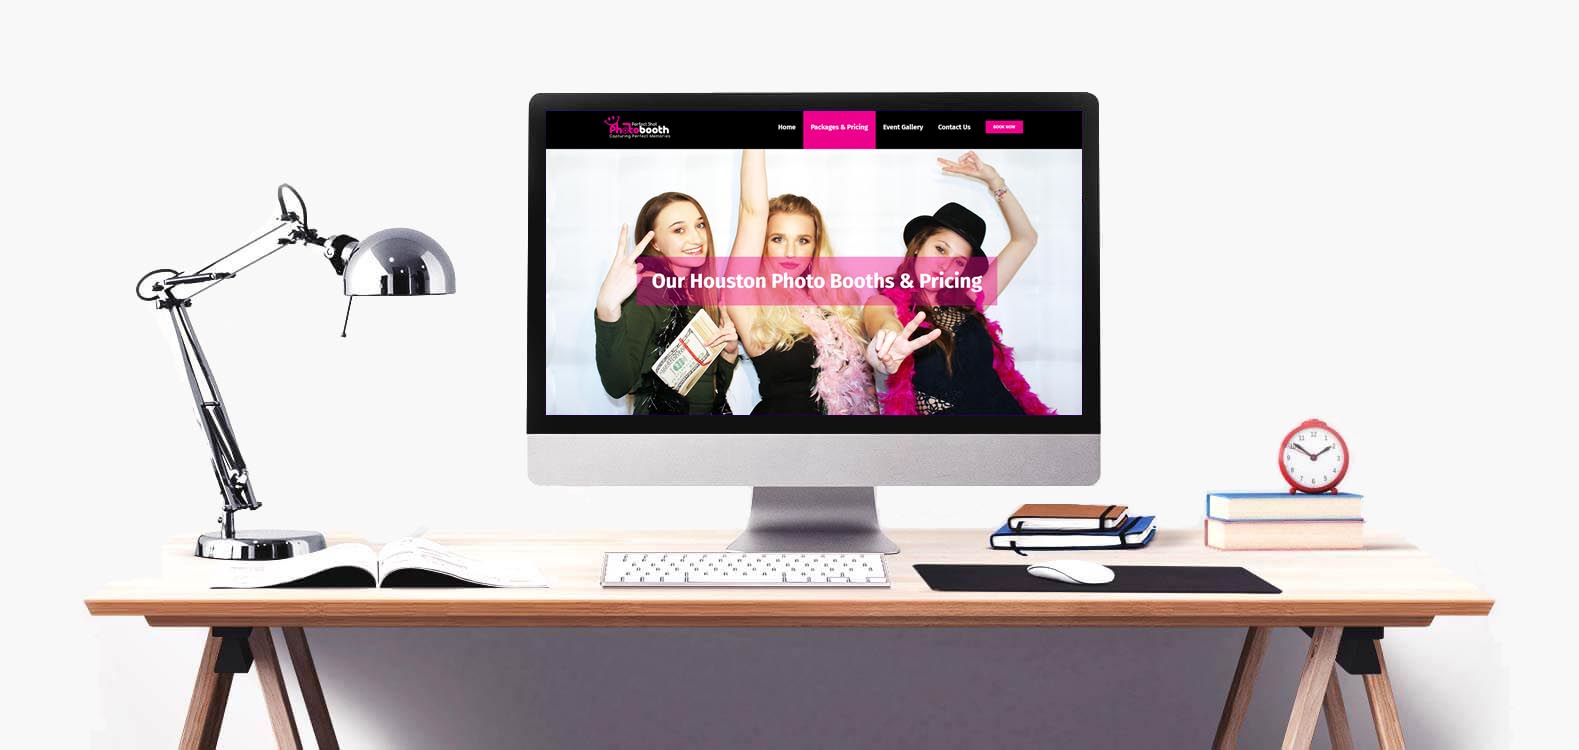 Perfect Shot Photo Booth's website on a desktop